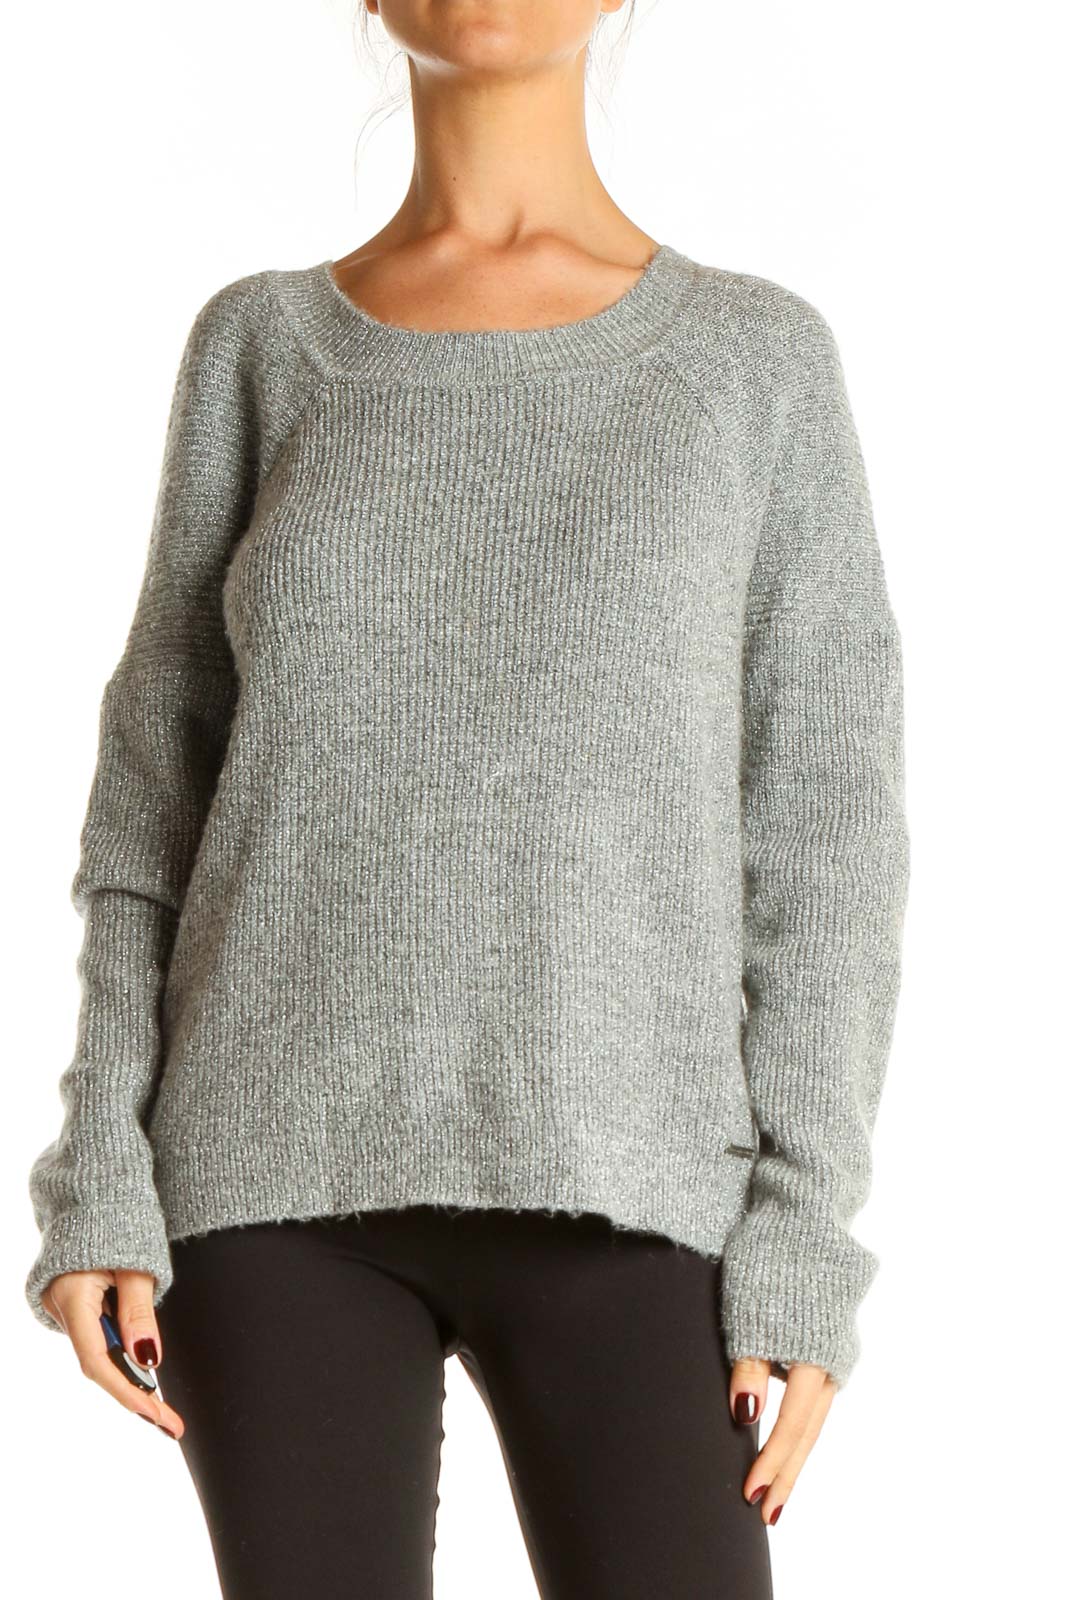 Gray All Day Wear Sweater Front